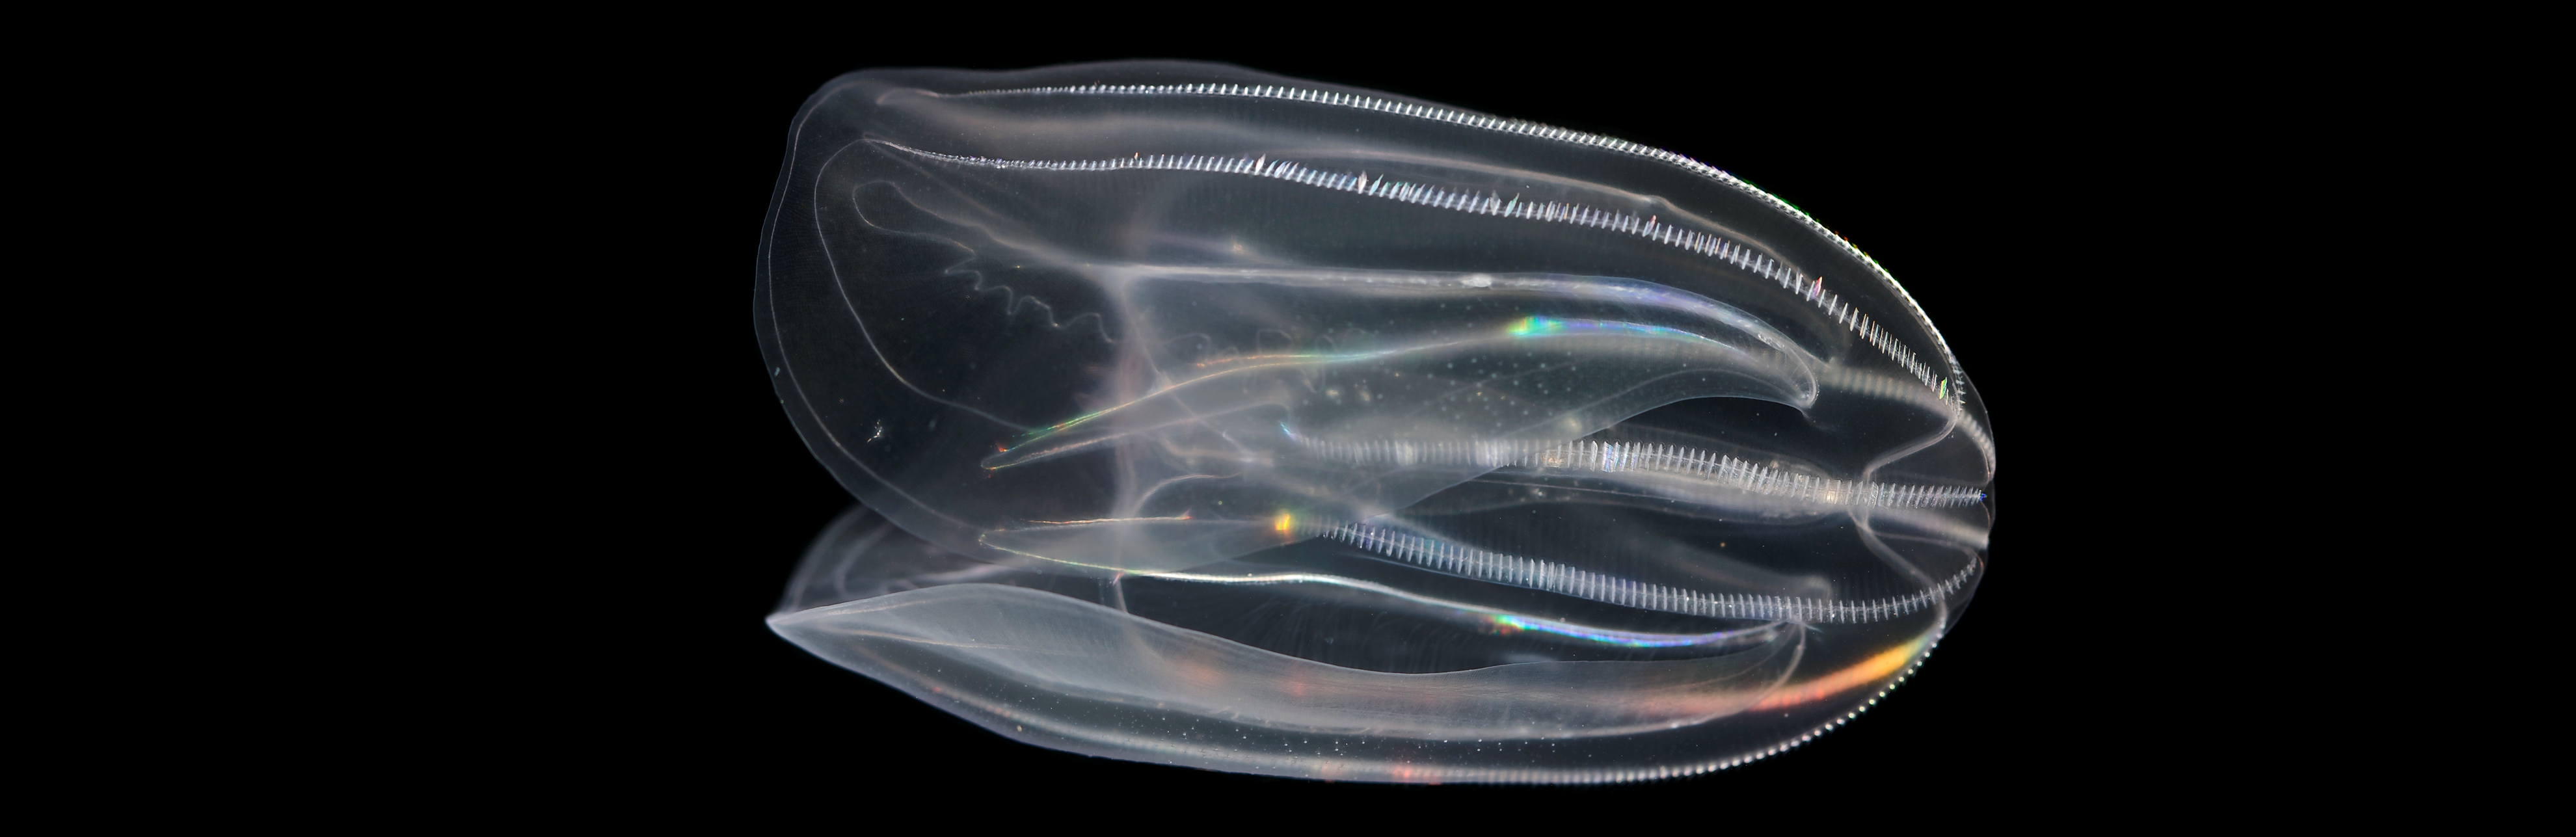 Comb Jelly (Mnemiopsis leidyi). Credit: William E. Browne